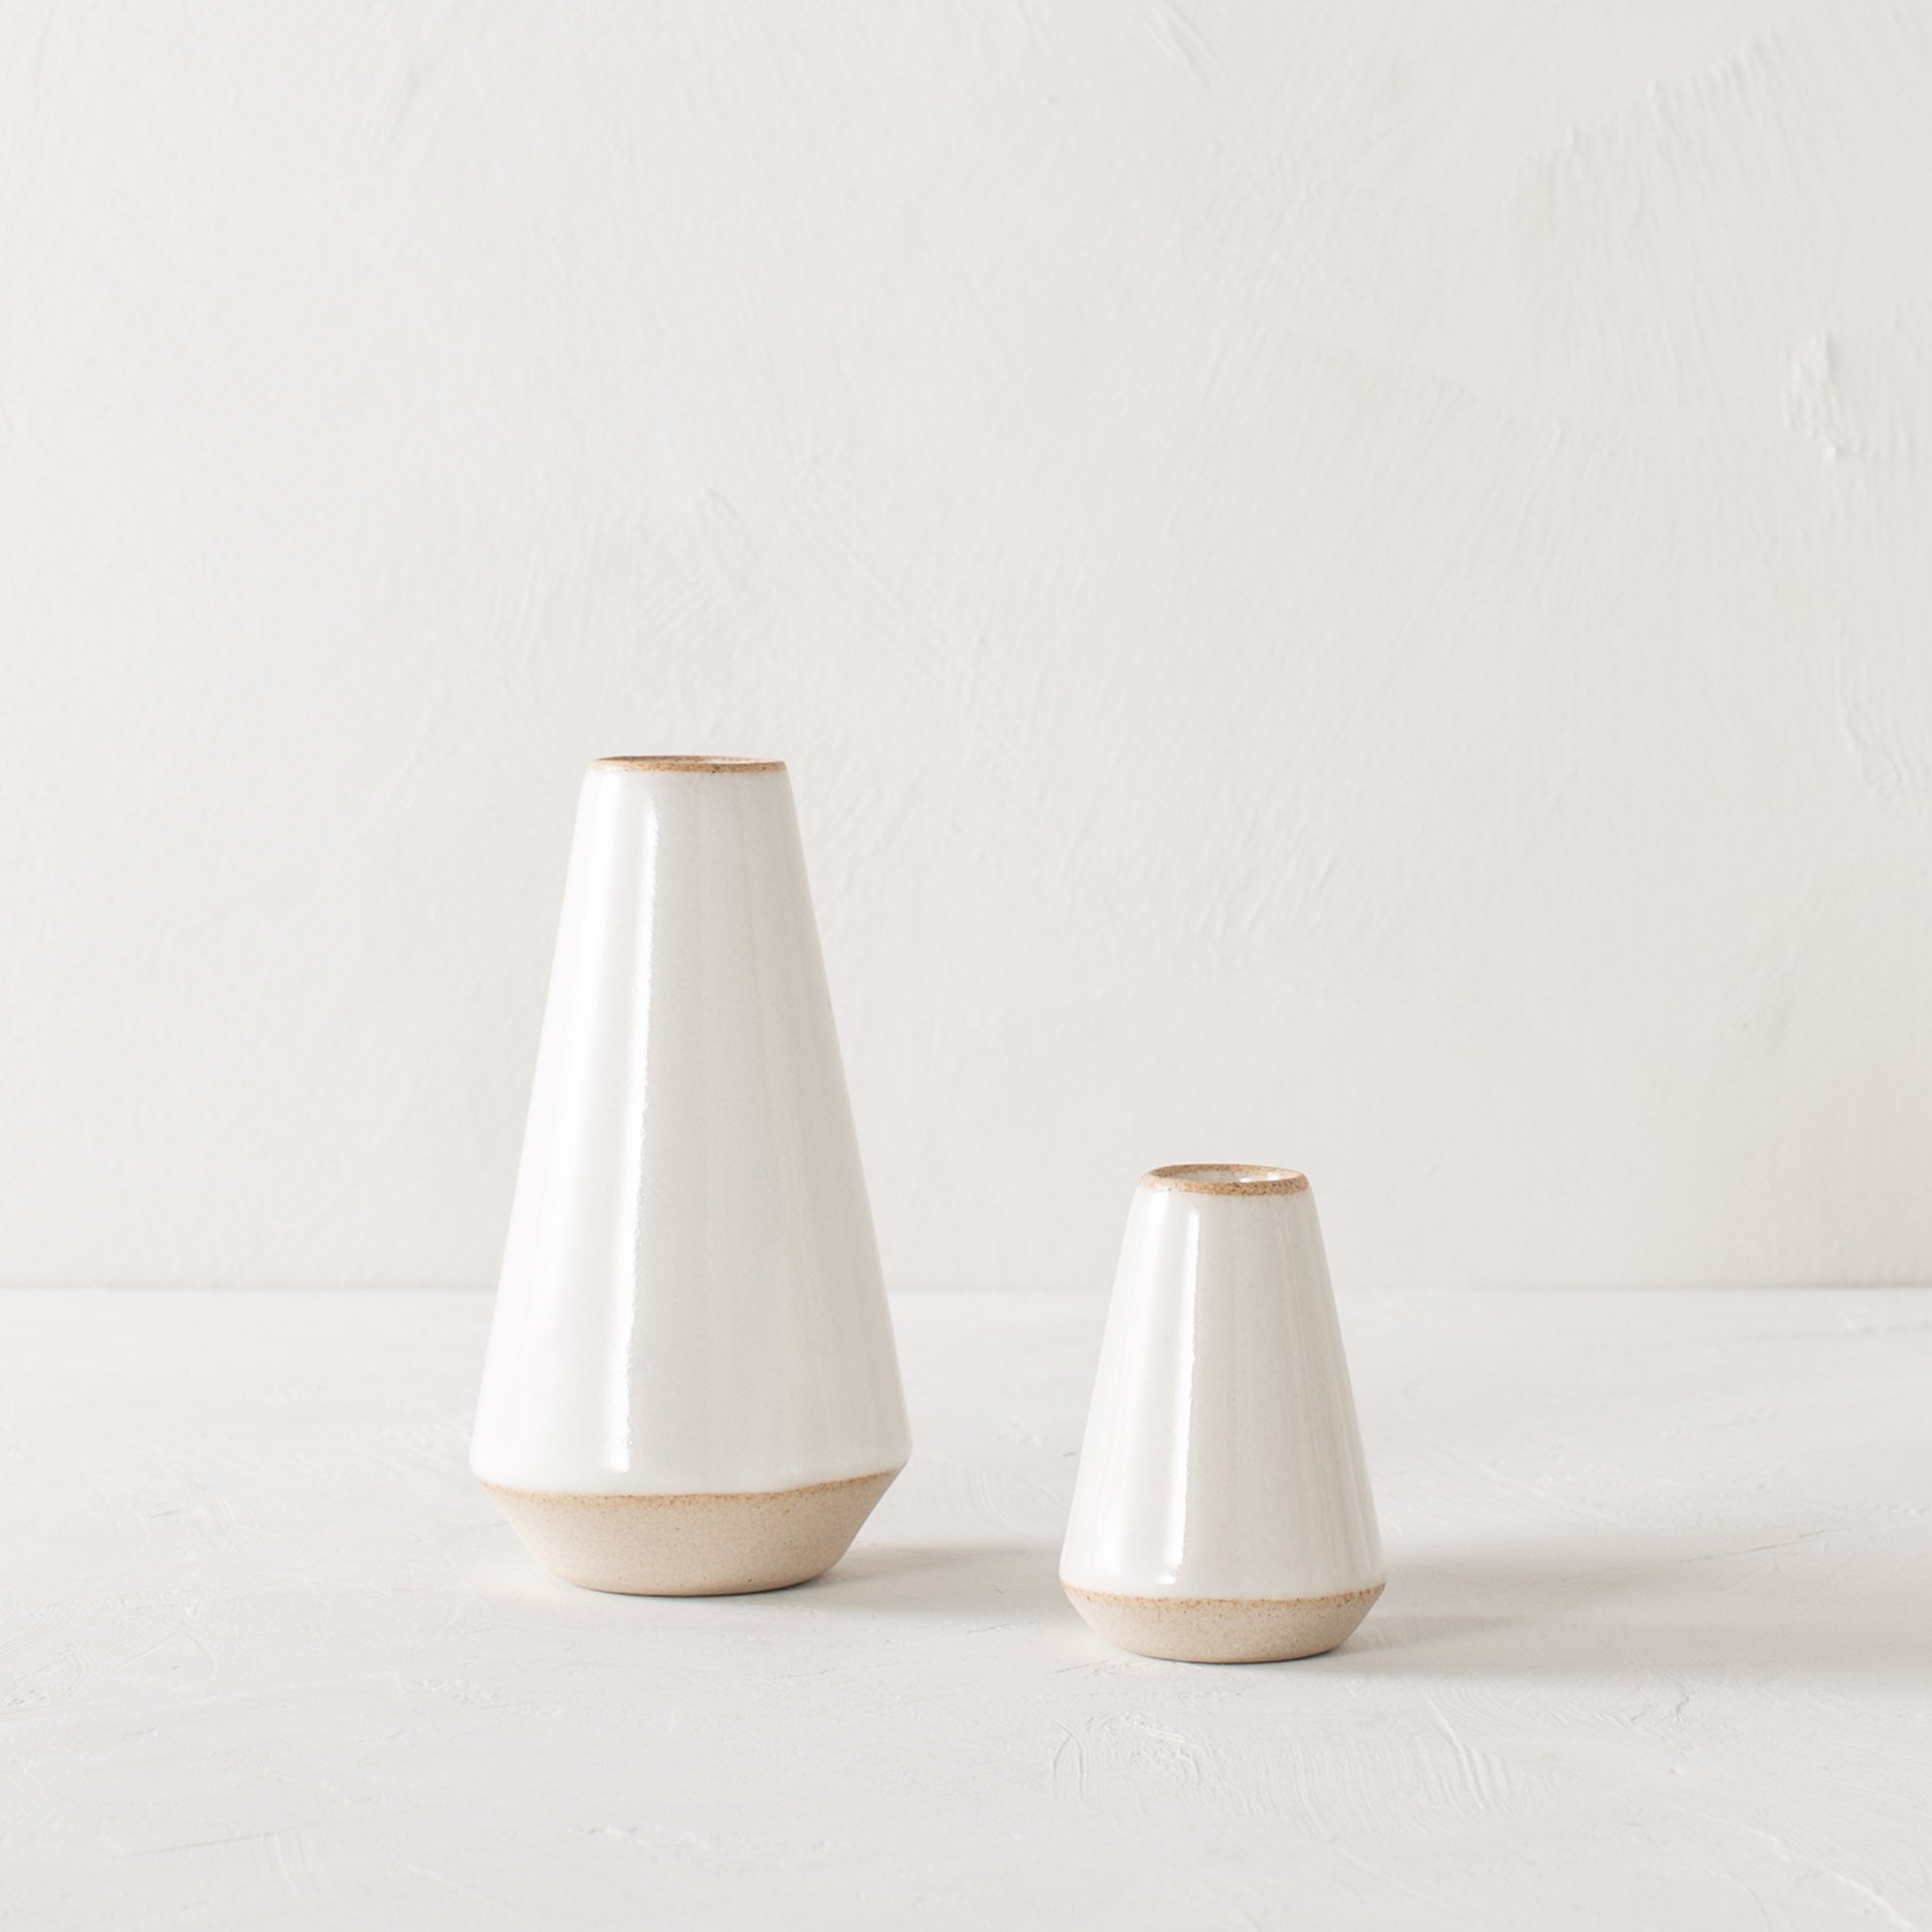 Two minimal white tapered bud vases side by side, seven inch and 4 in. Handmade ceramic bud vase designed and sold by Convivial Production, Kansas City ceramics.